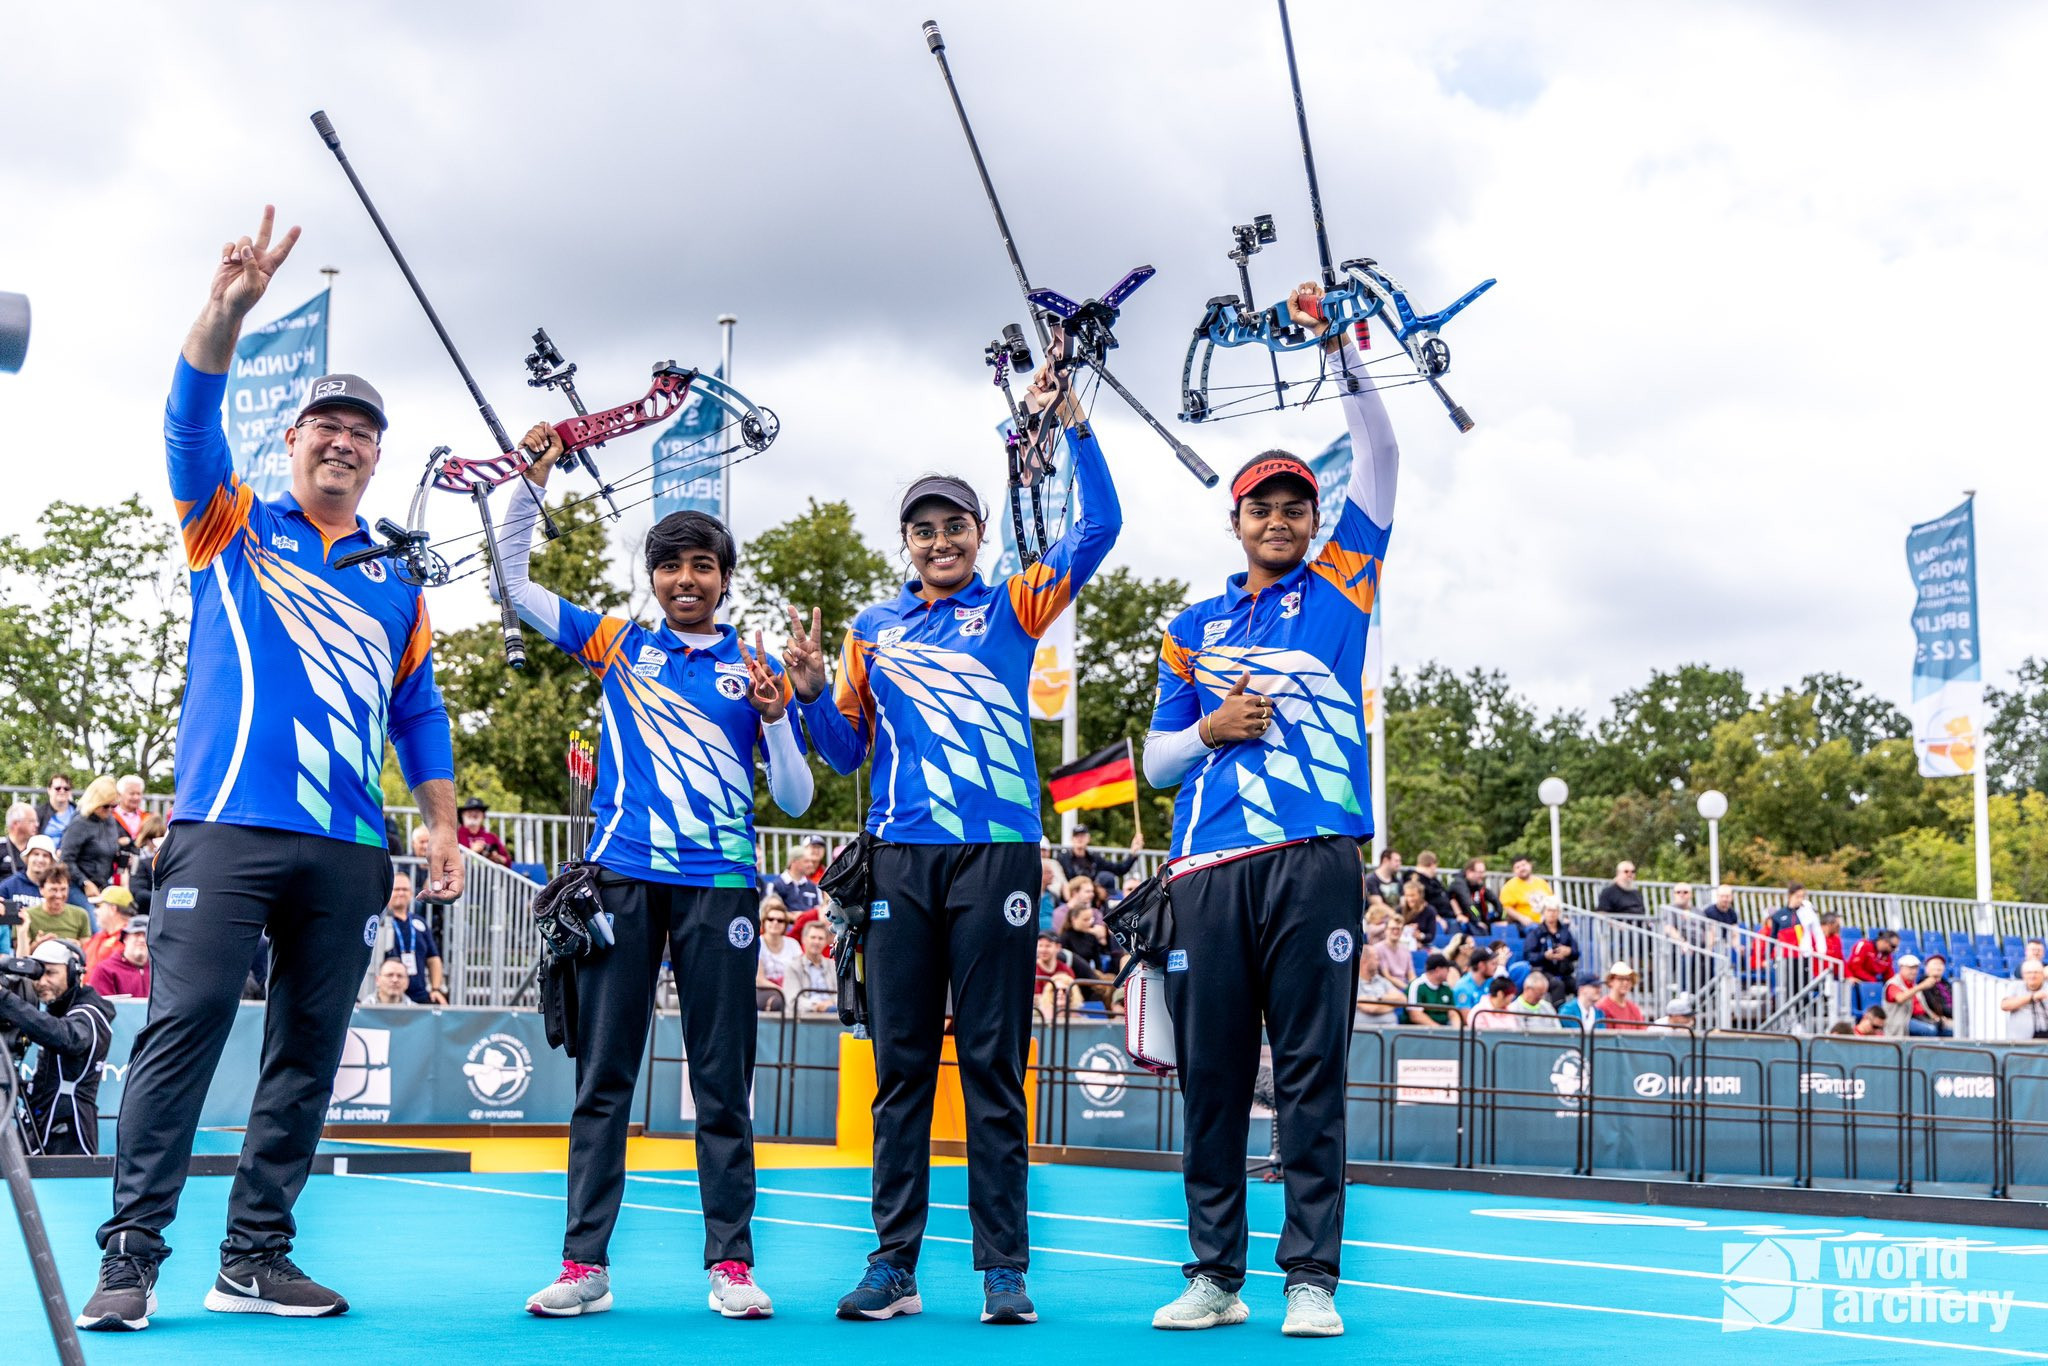 India and Poland triumph in compound team finals at World Archery Championships 